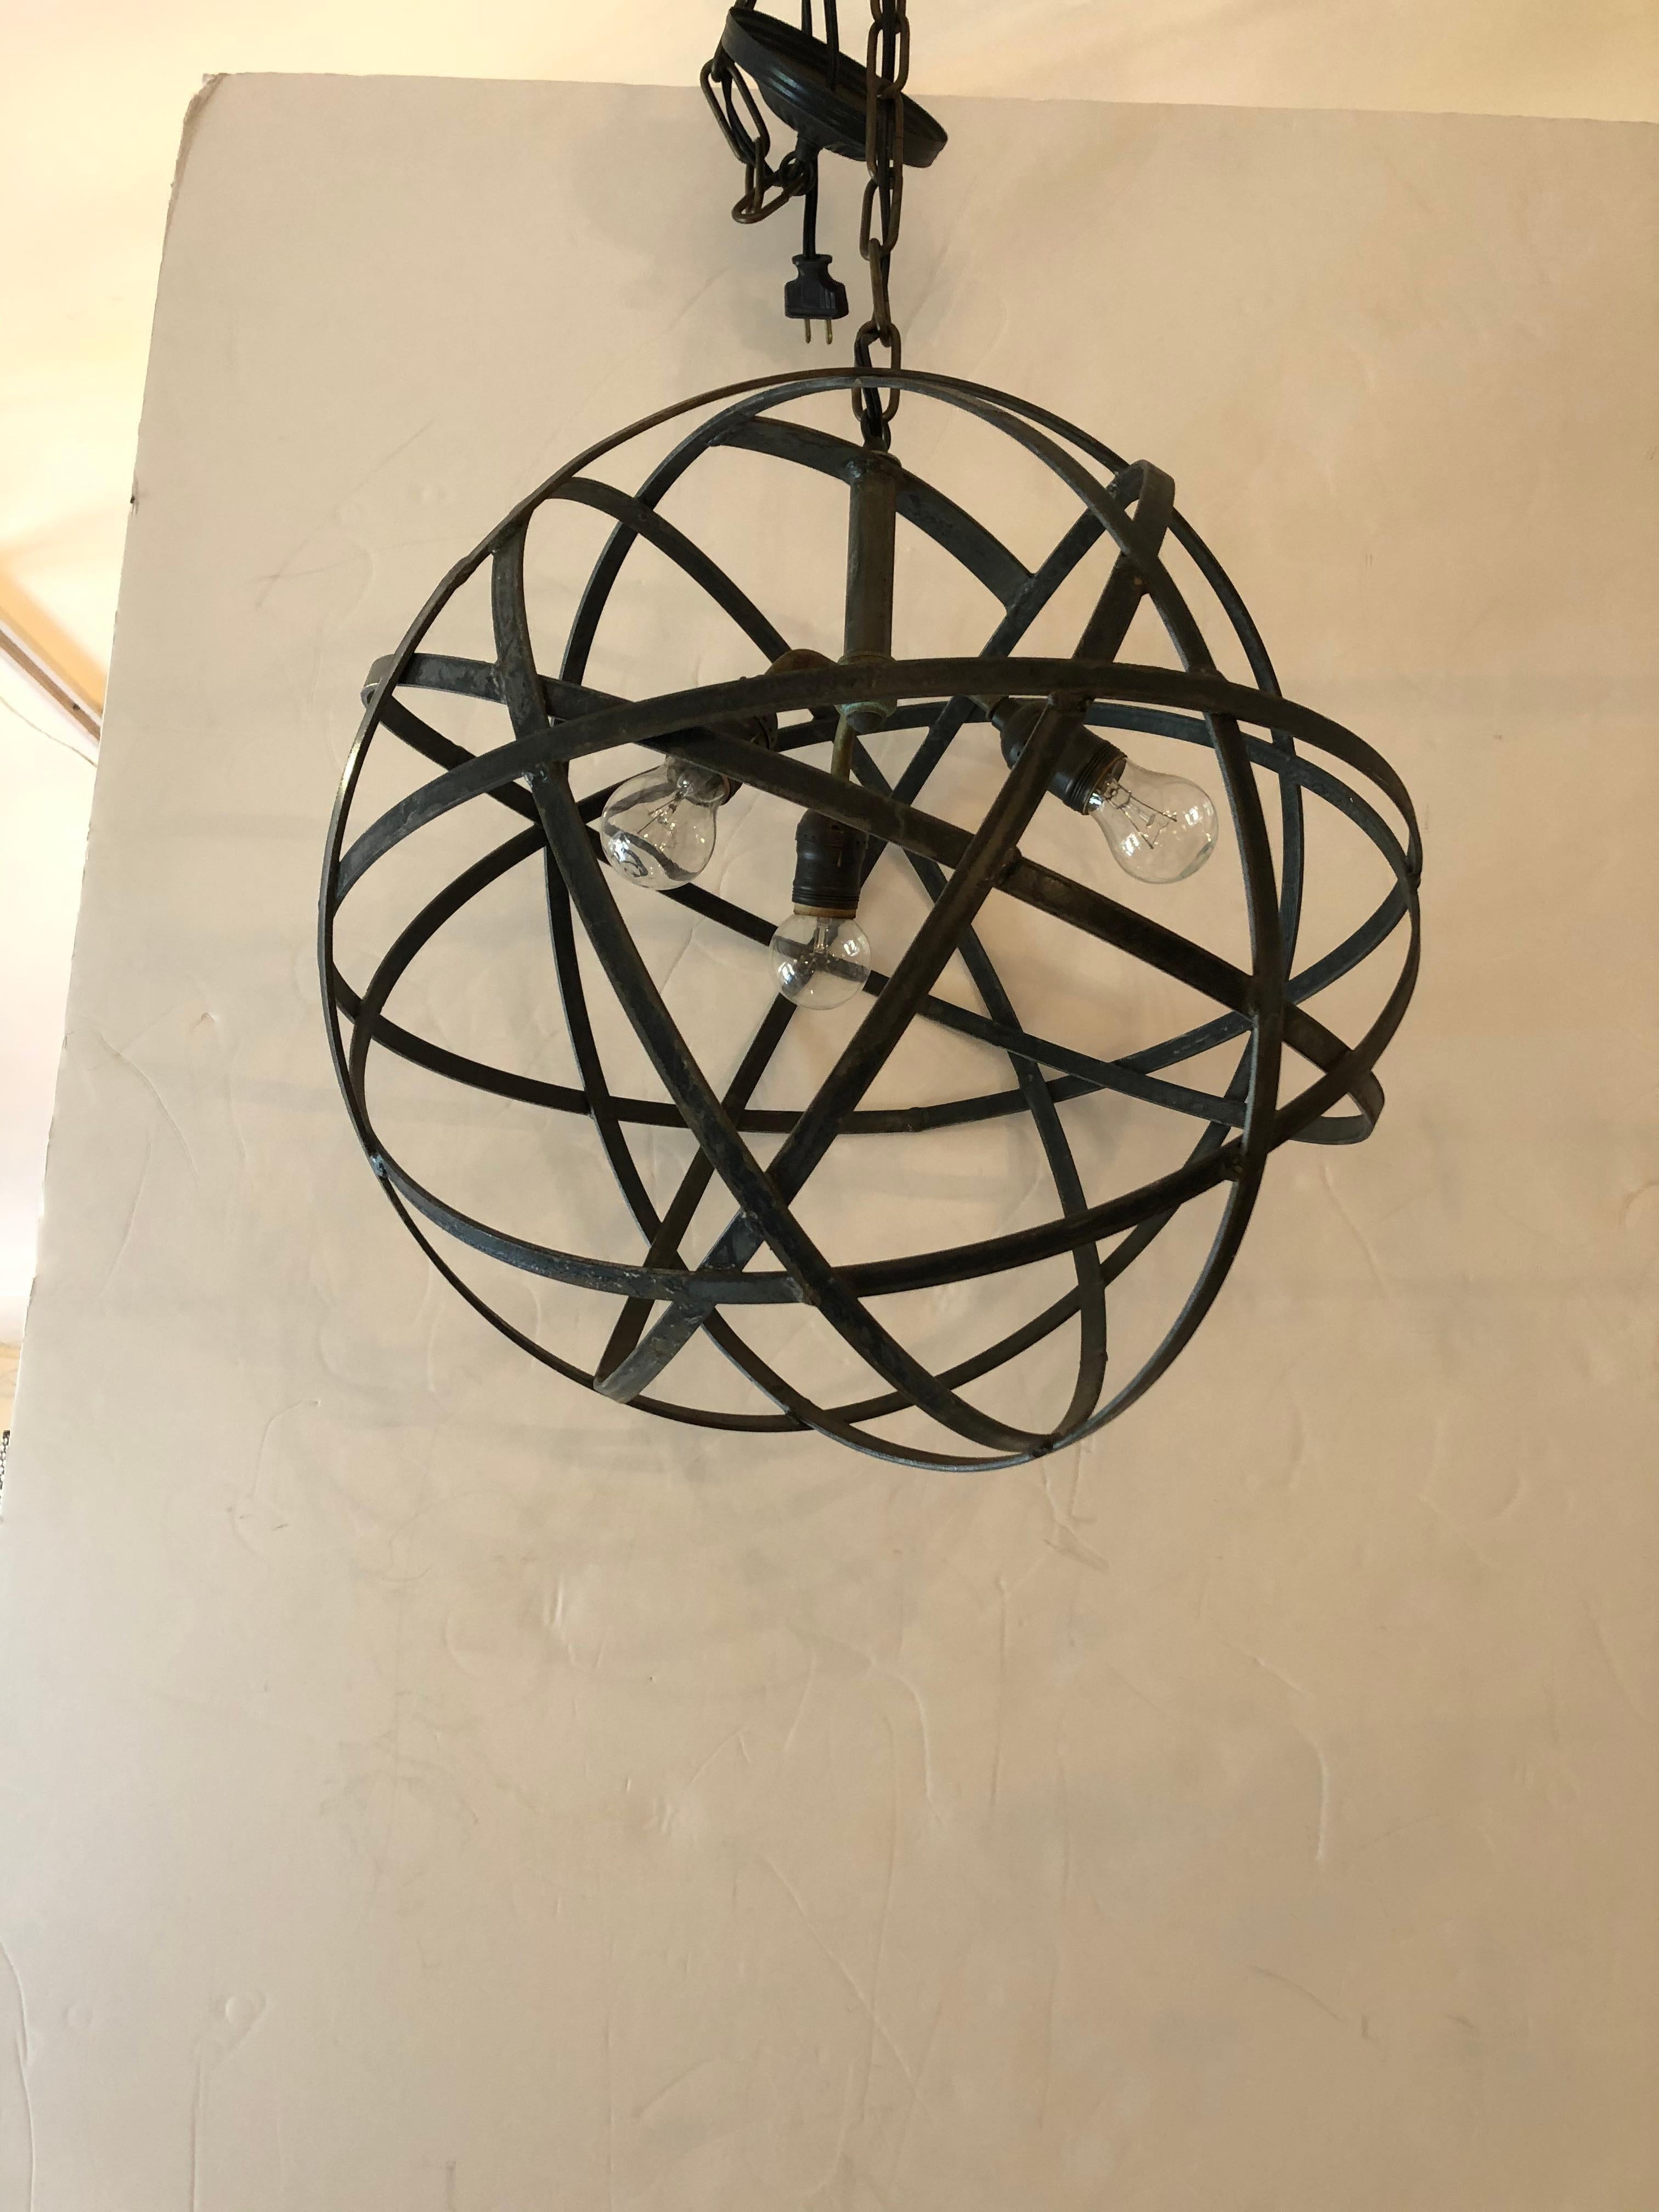 Super cool vintage industrial spherical orb chandelier having bands of overlapping steel and 3 interior sockets with great pipe design.
30